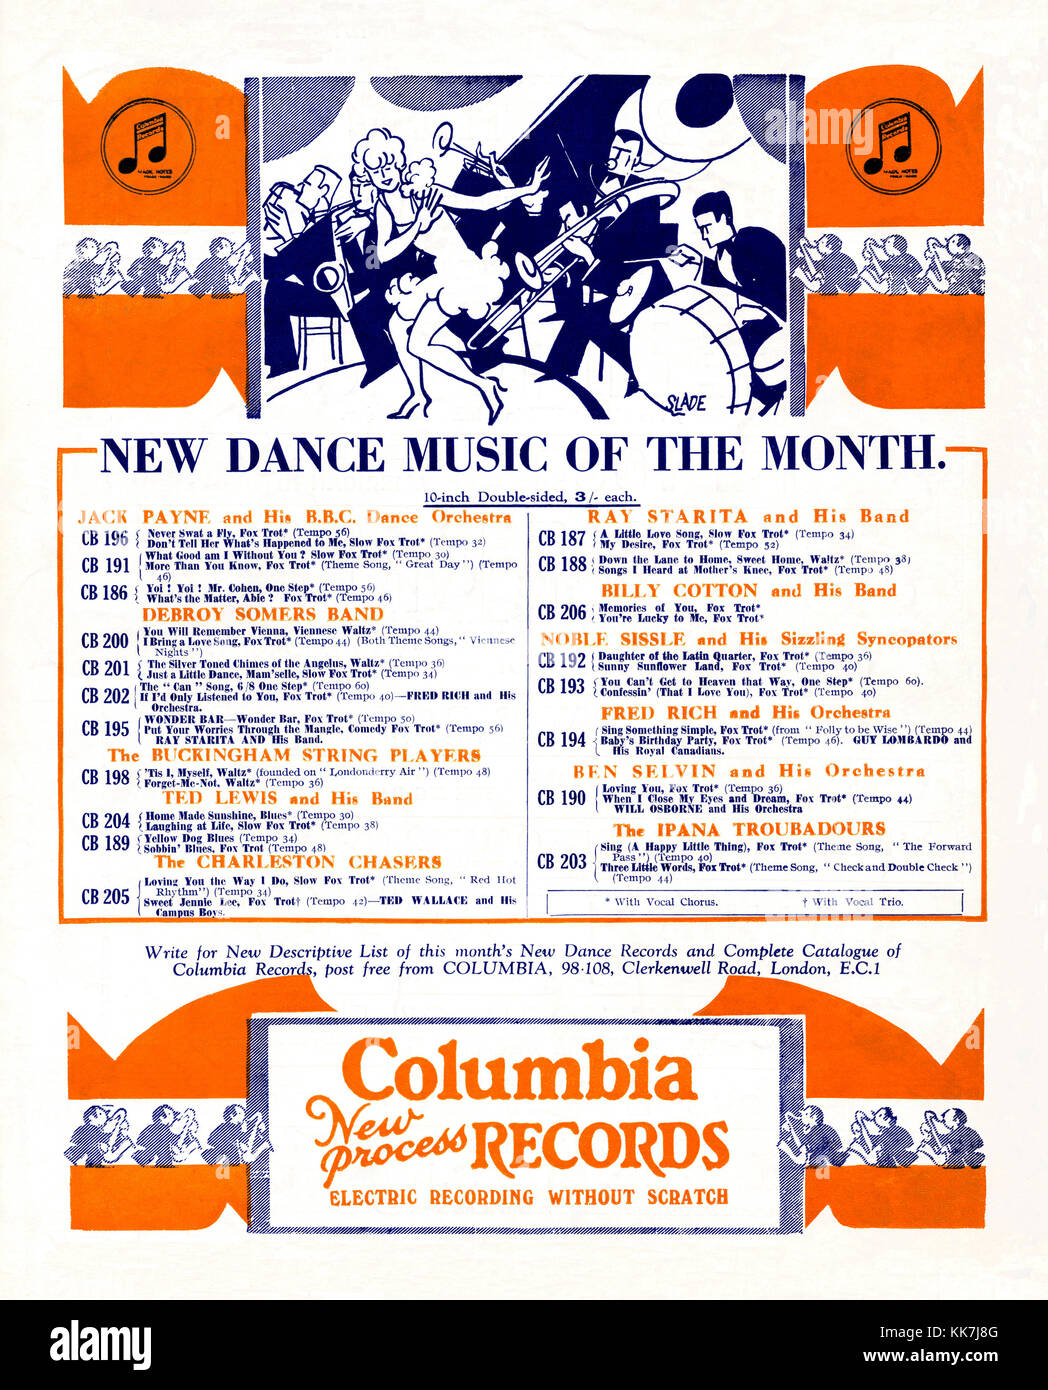 A 1931 advert for Columbia Records. It appeared in the British music magazine, Melody Maker. The advert has an illustration of a female dancer fronting a swing band with the brass section and drummer. It promotes the dance music of the month - mainly big band music including Jack Payne and his BBC Dance Orchestra and Billy Cotton and His Band with music on 10 inch double sided disks Stock Photo